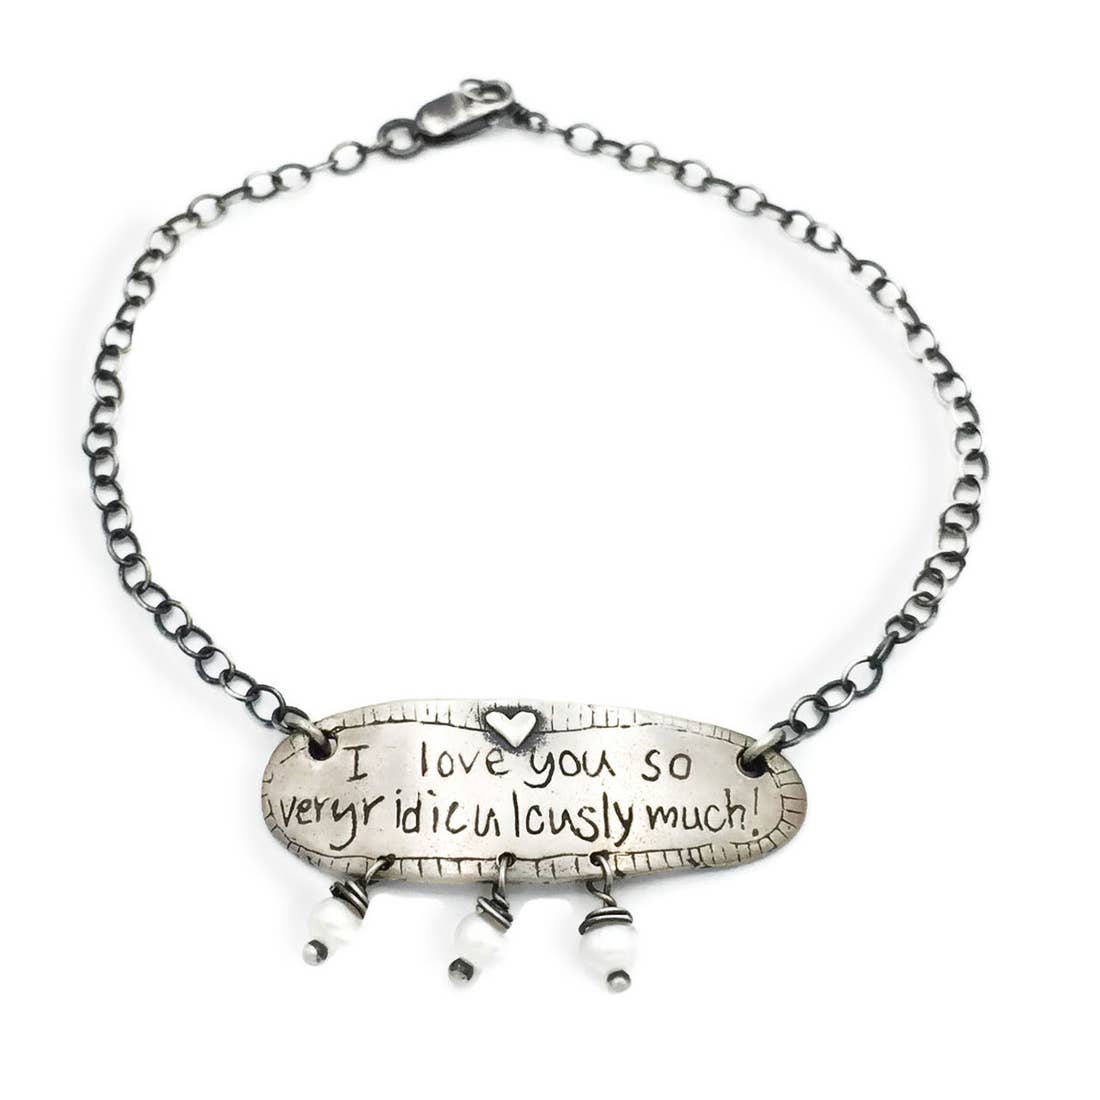 I love you so ridiculously much charm bracelet